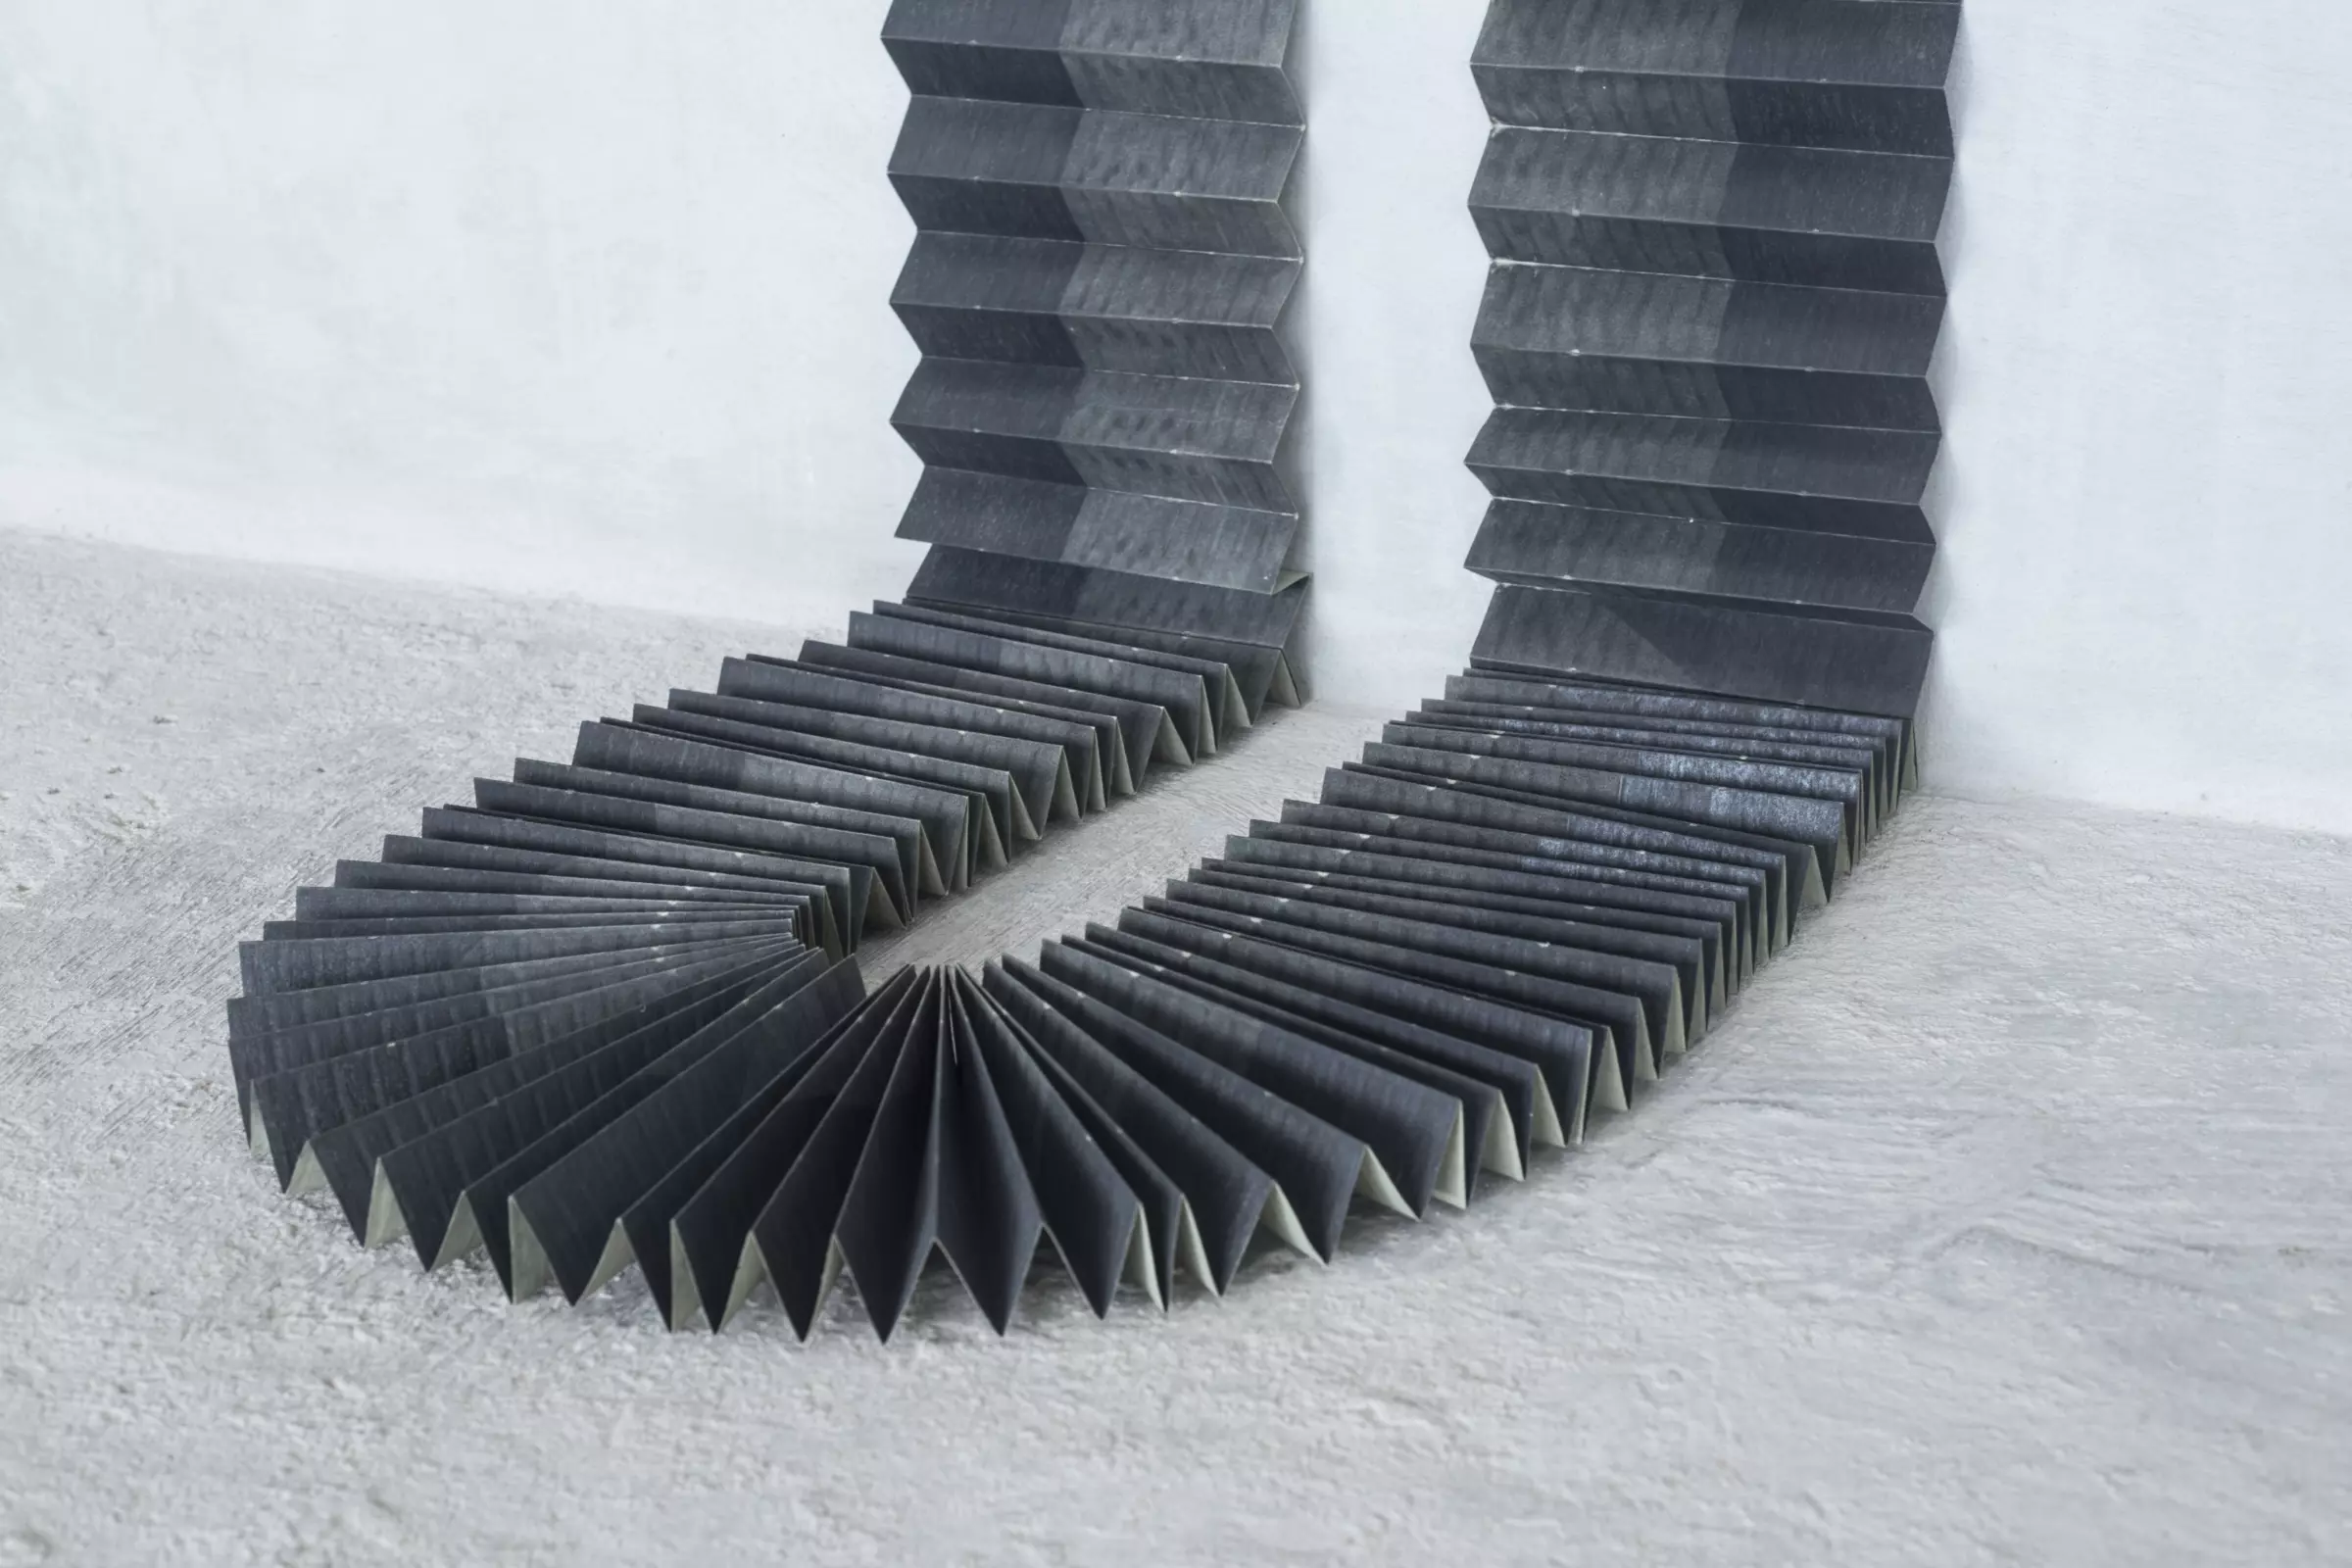 accordion-like folded paper runs down gallery wall, u-turning at the floor as it runs back up